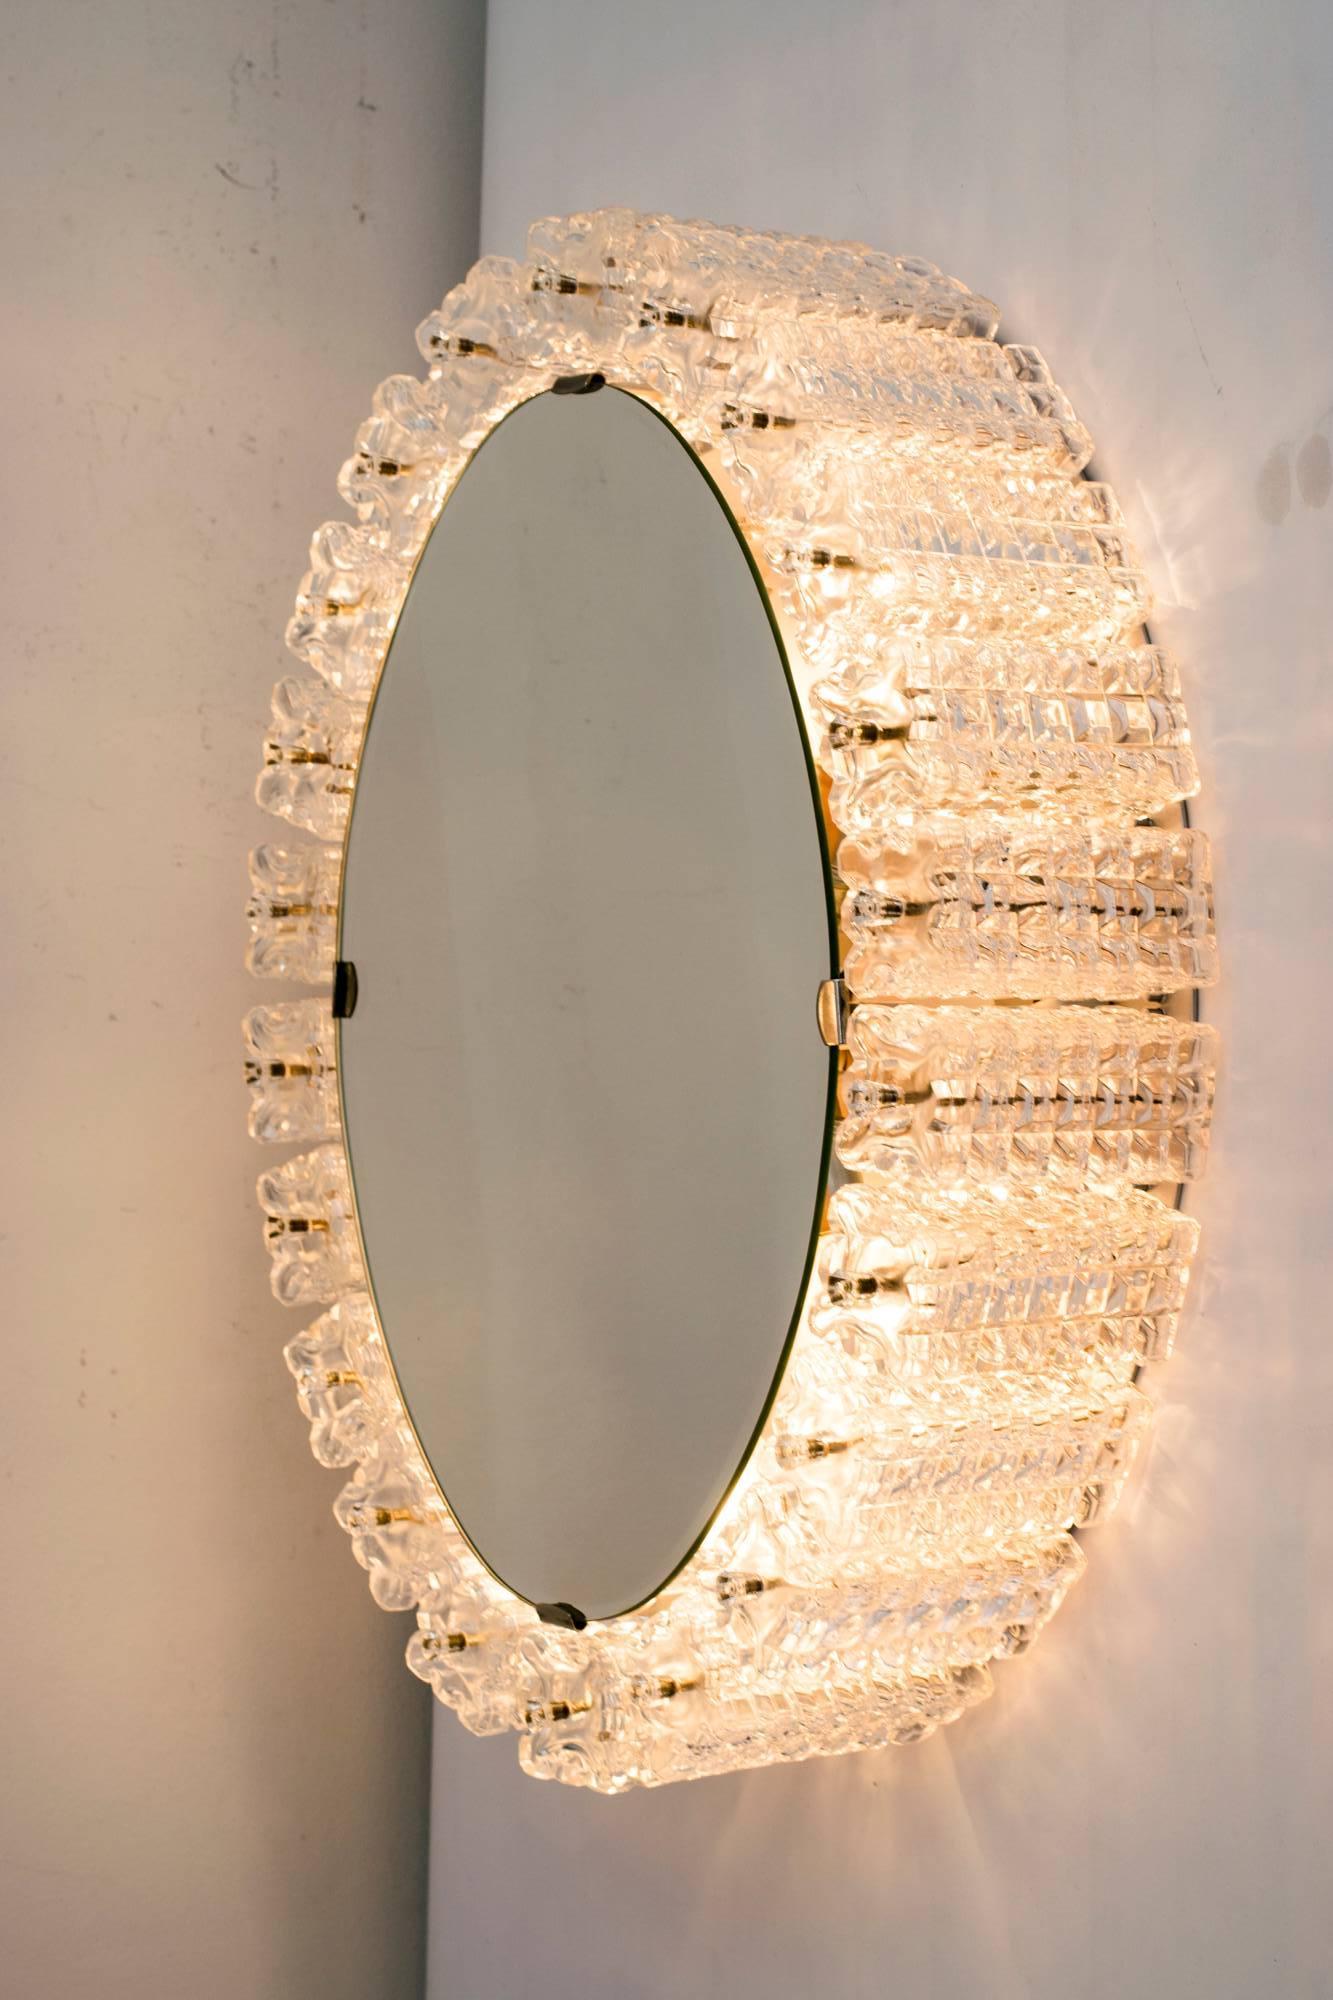 Mid-Century Modern Oval Backlight Mirror by Austrolux, Vienna, 1950s For Sale